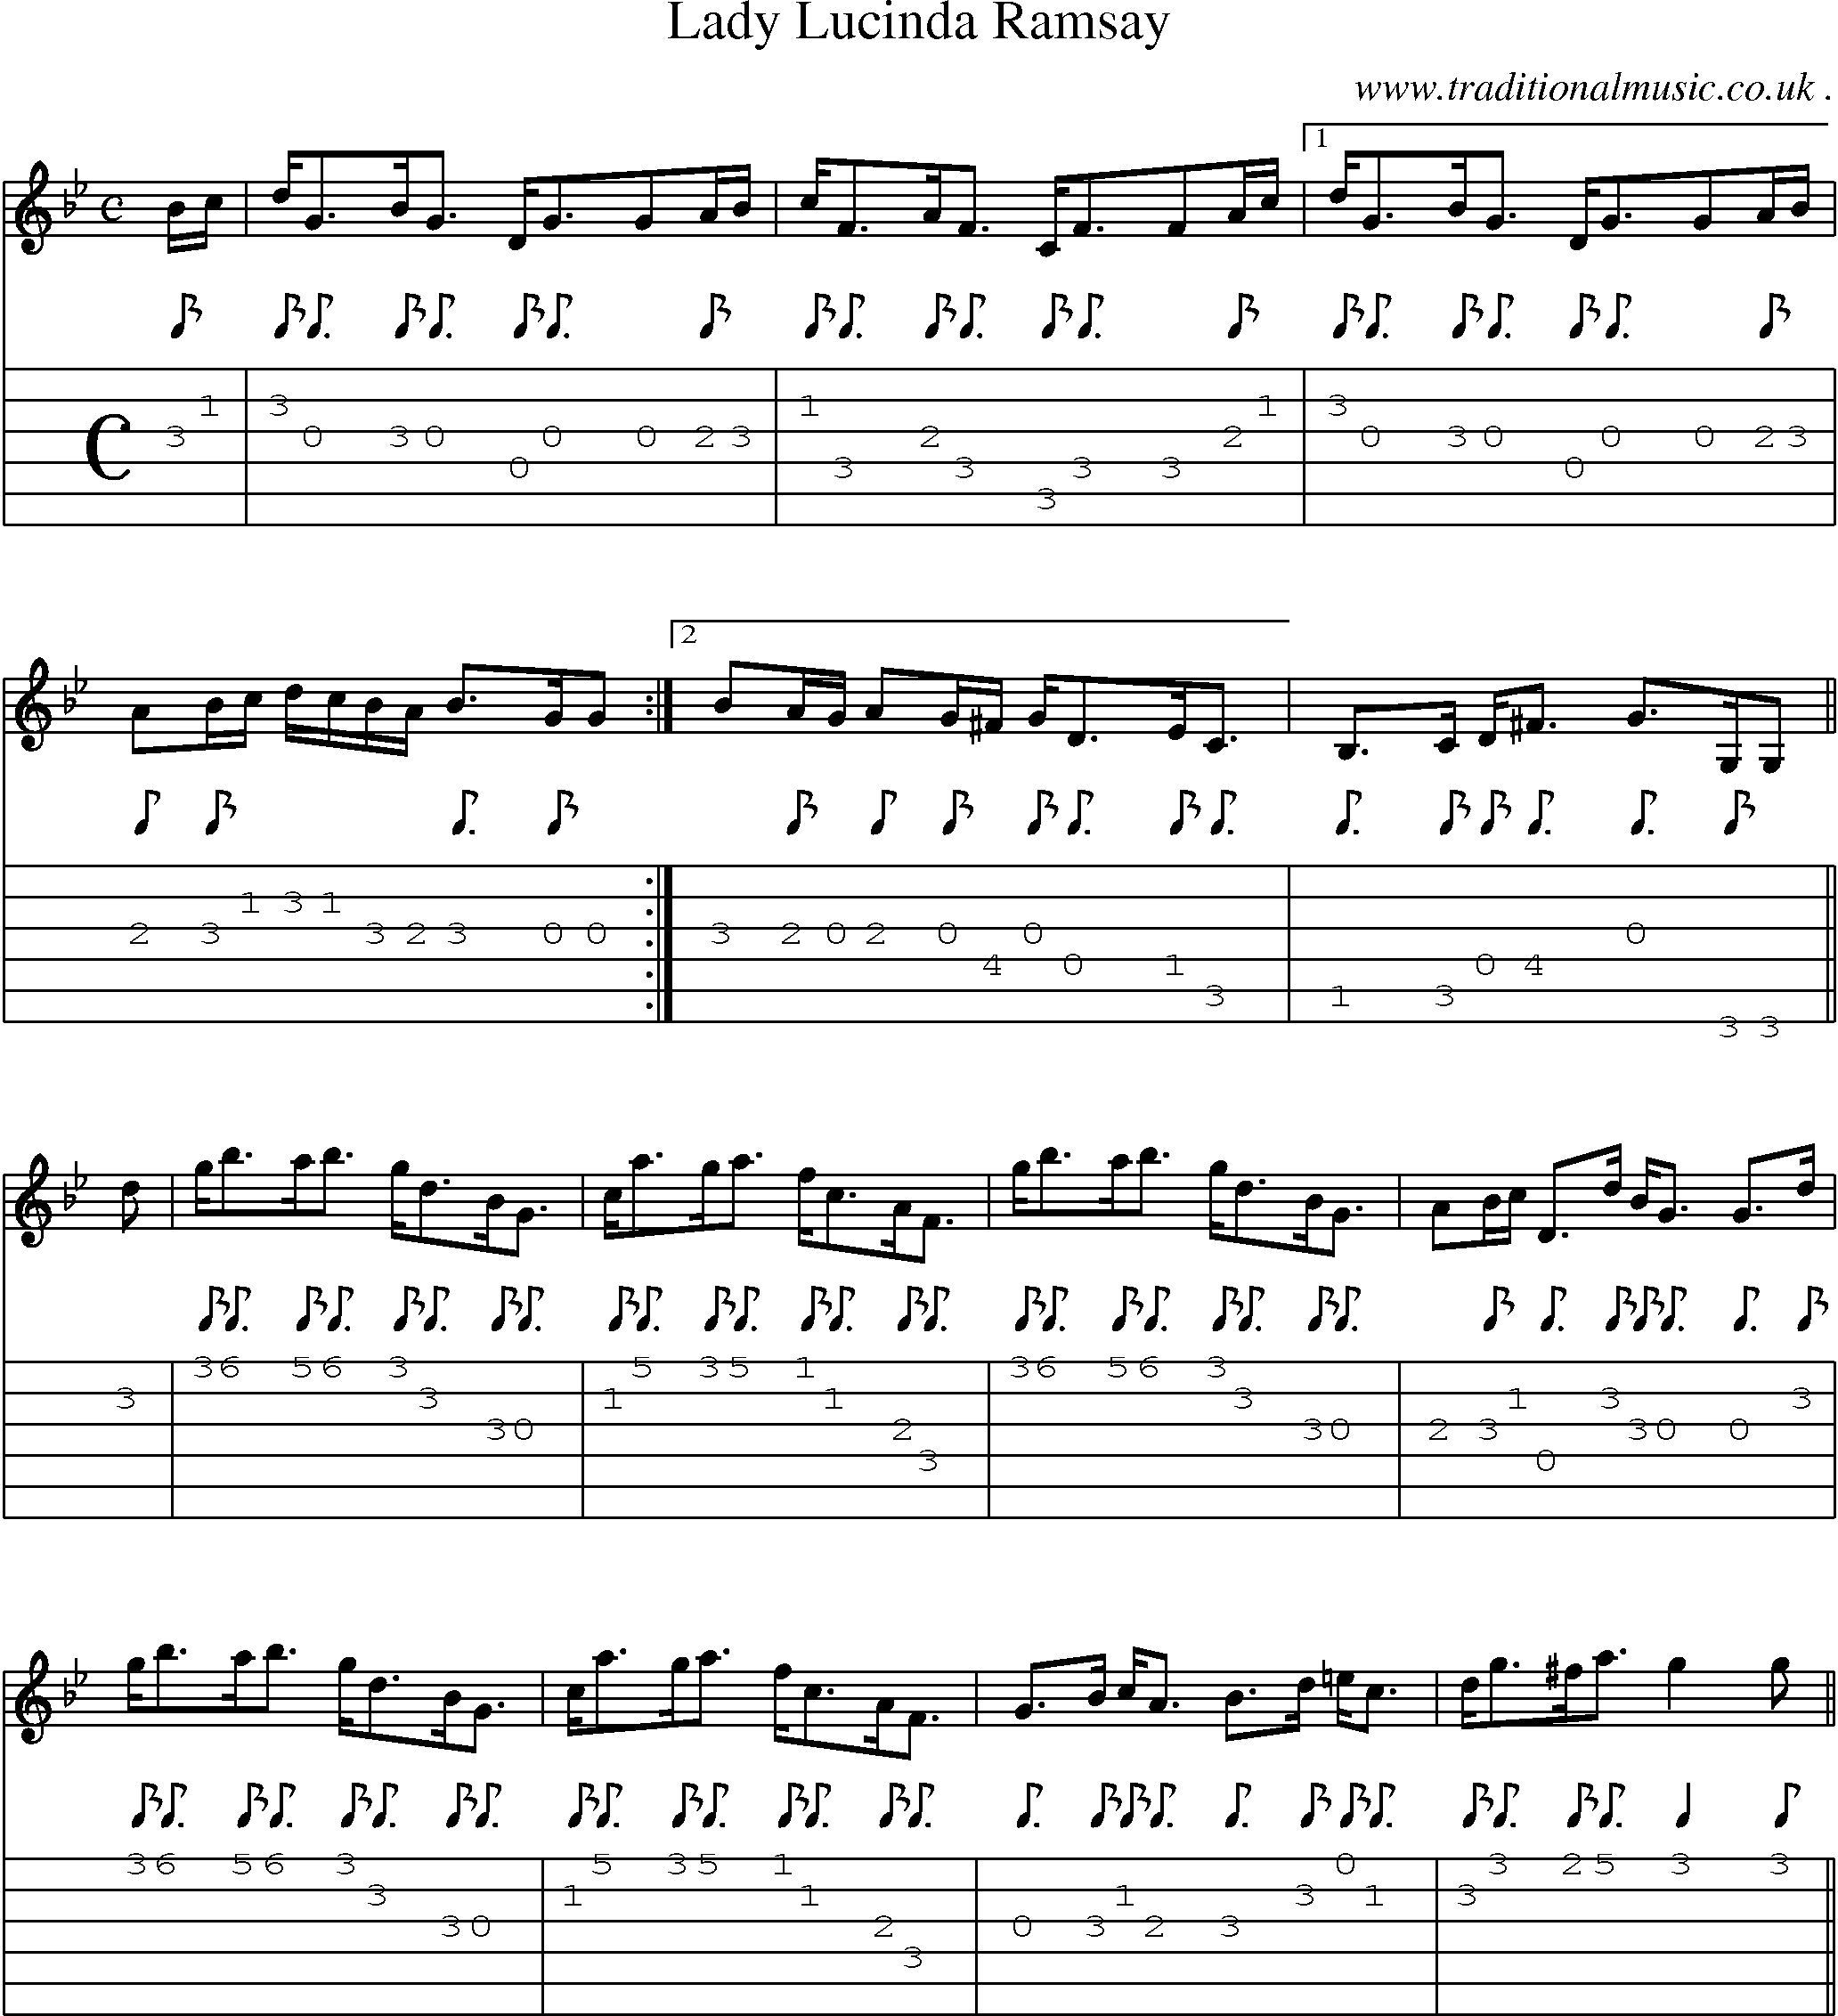 Sheet-music  score, Chords and Guitar Tabs for Lady Lucinda Ramsay